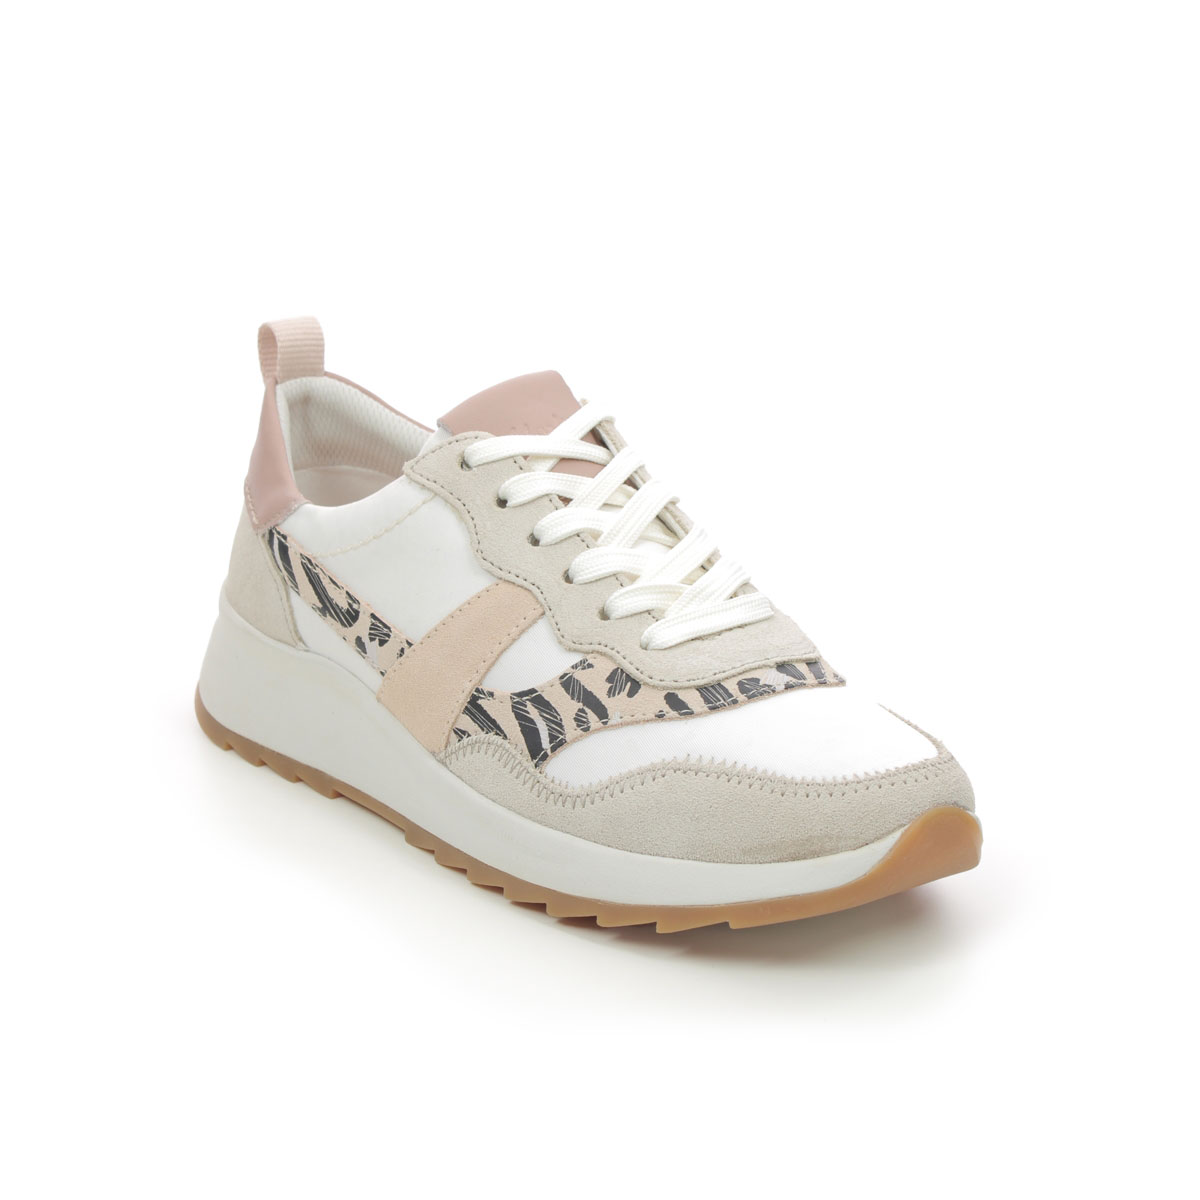 Clarks Dashlite Jazz White Pink Womens Trainers 704294D In Size 3.5 In Plain White Pink